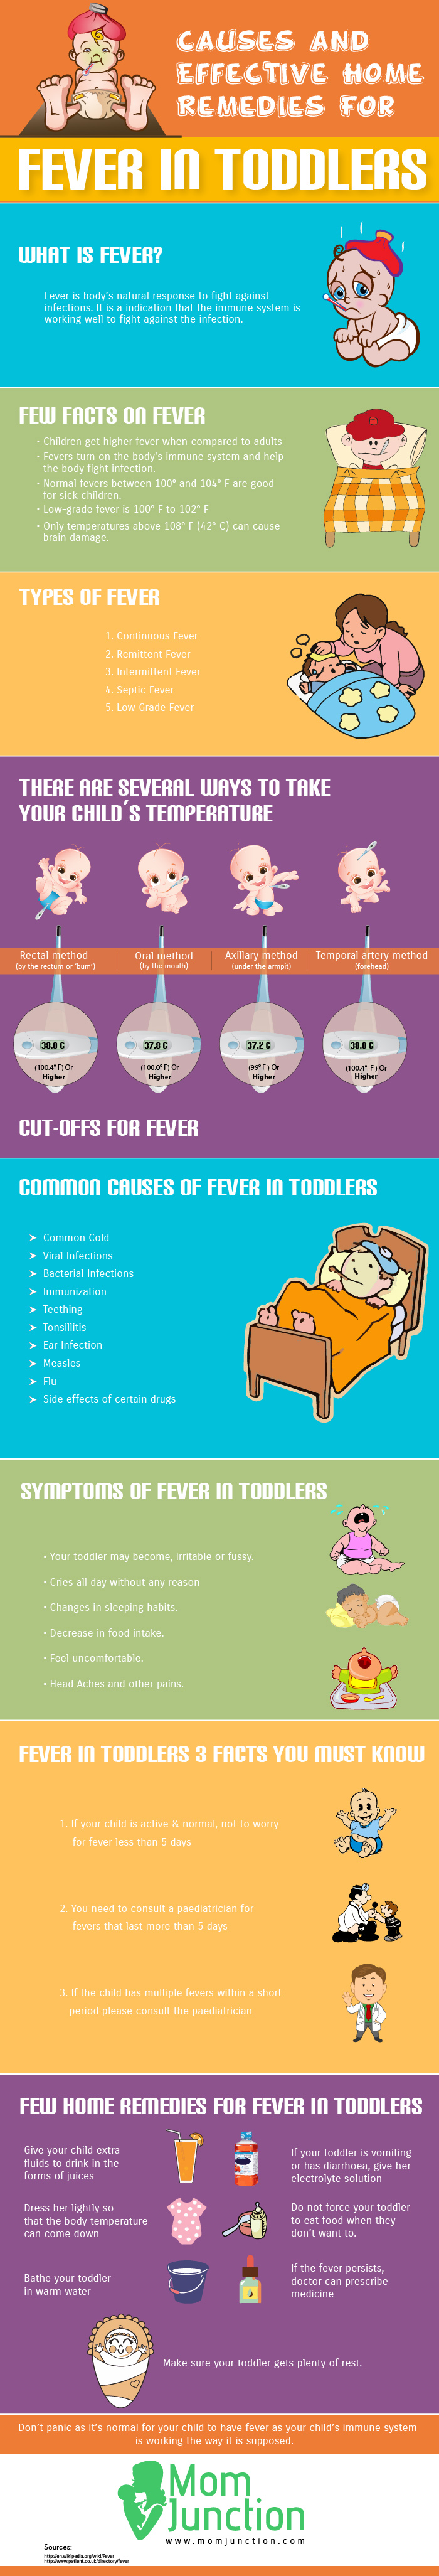 Effective Home Remedies For Fever In Toddlers